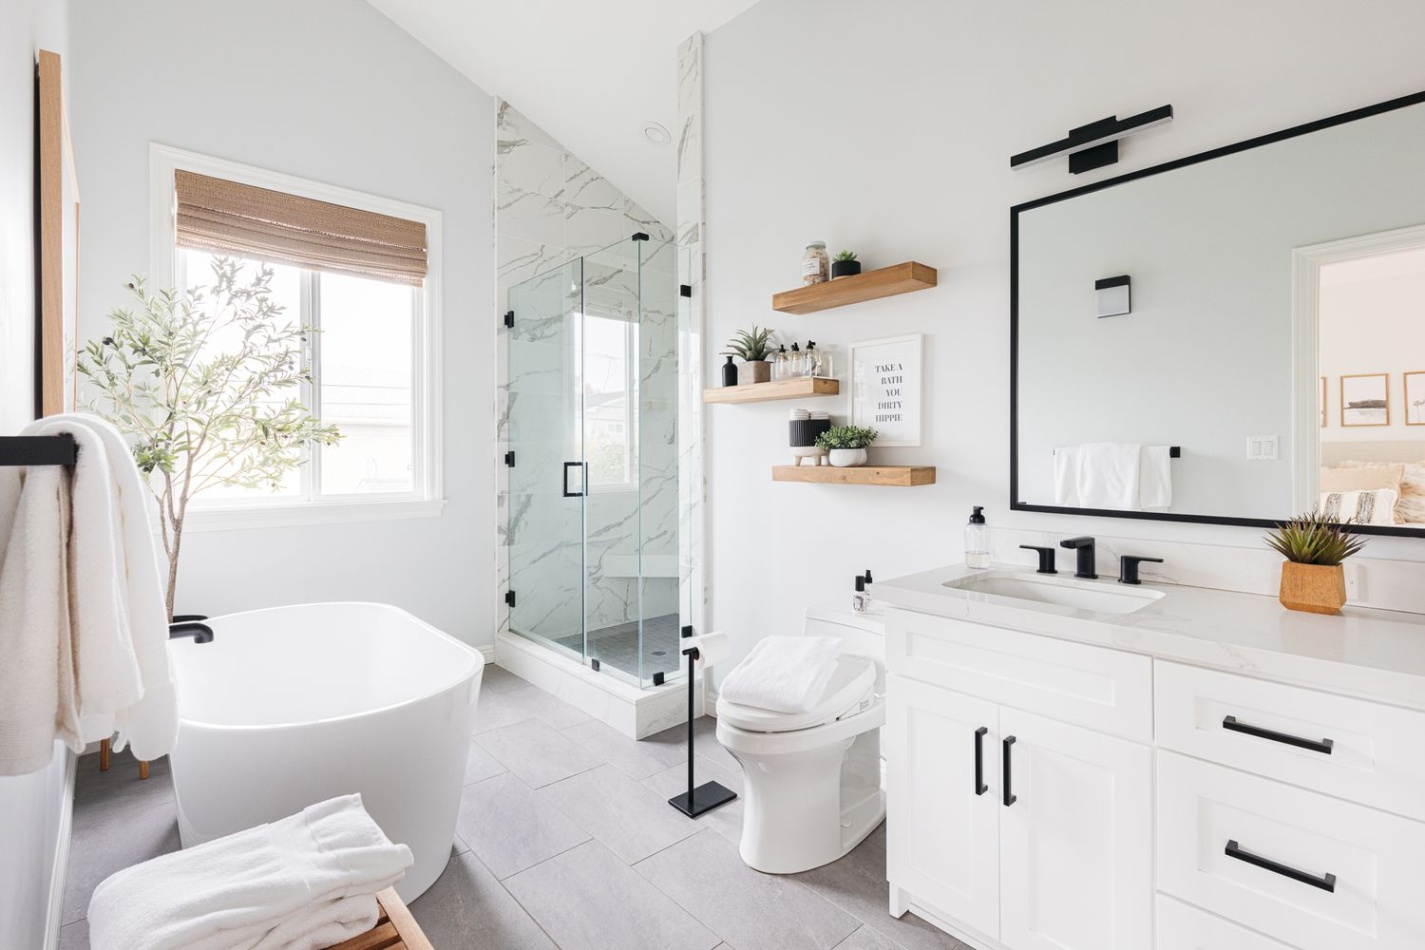 Get Inspired: Master Bath Design Ideas To Transform Your Space